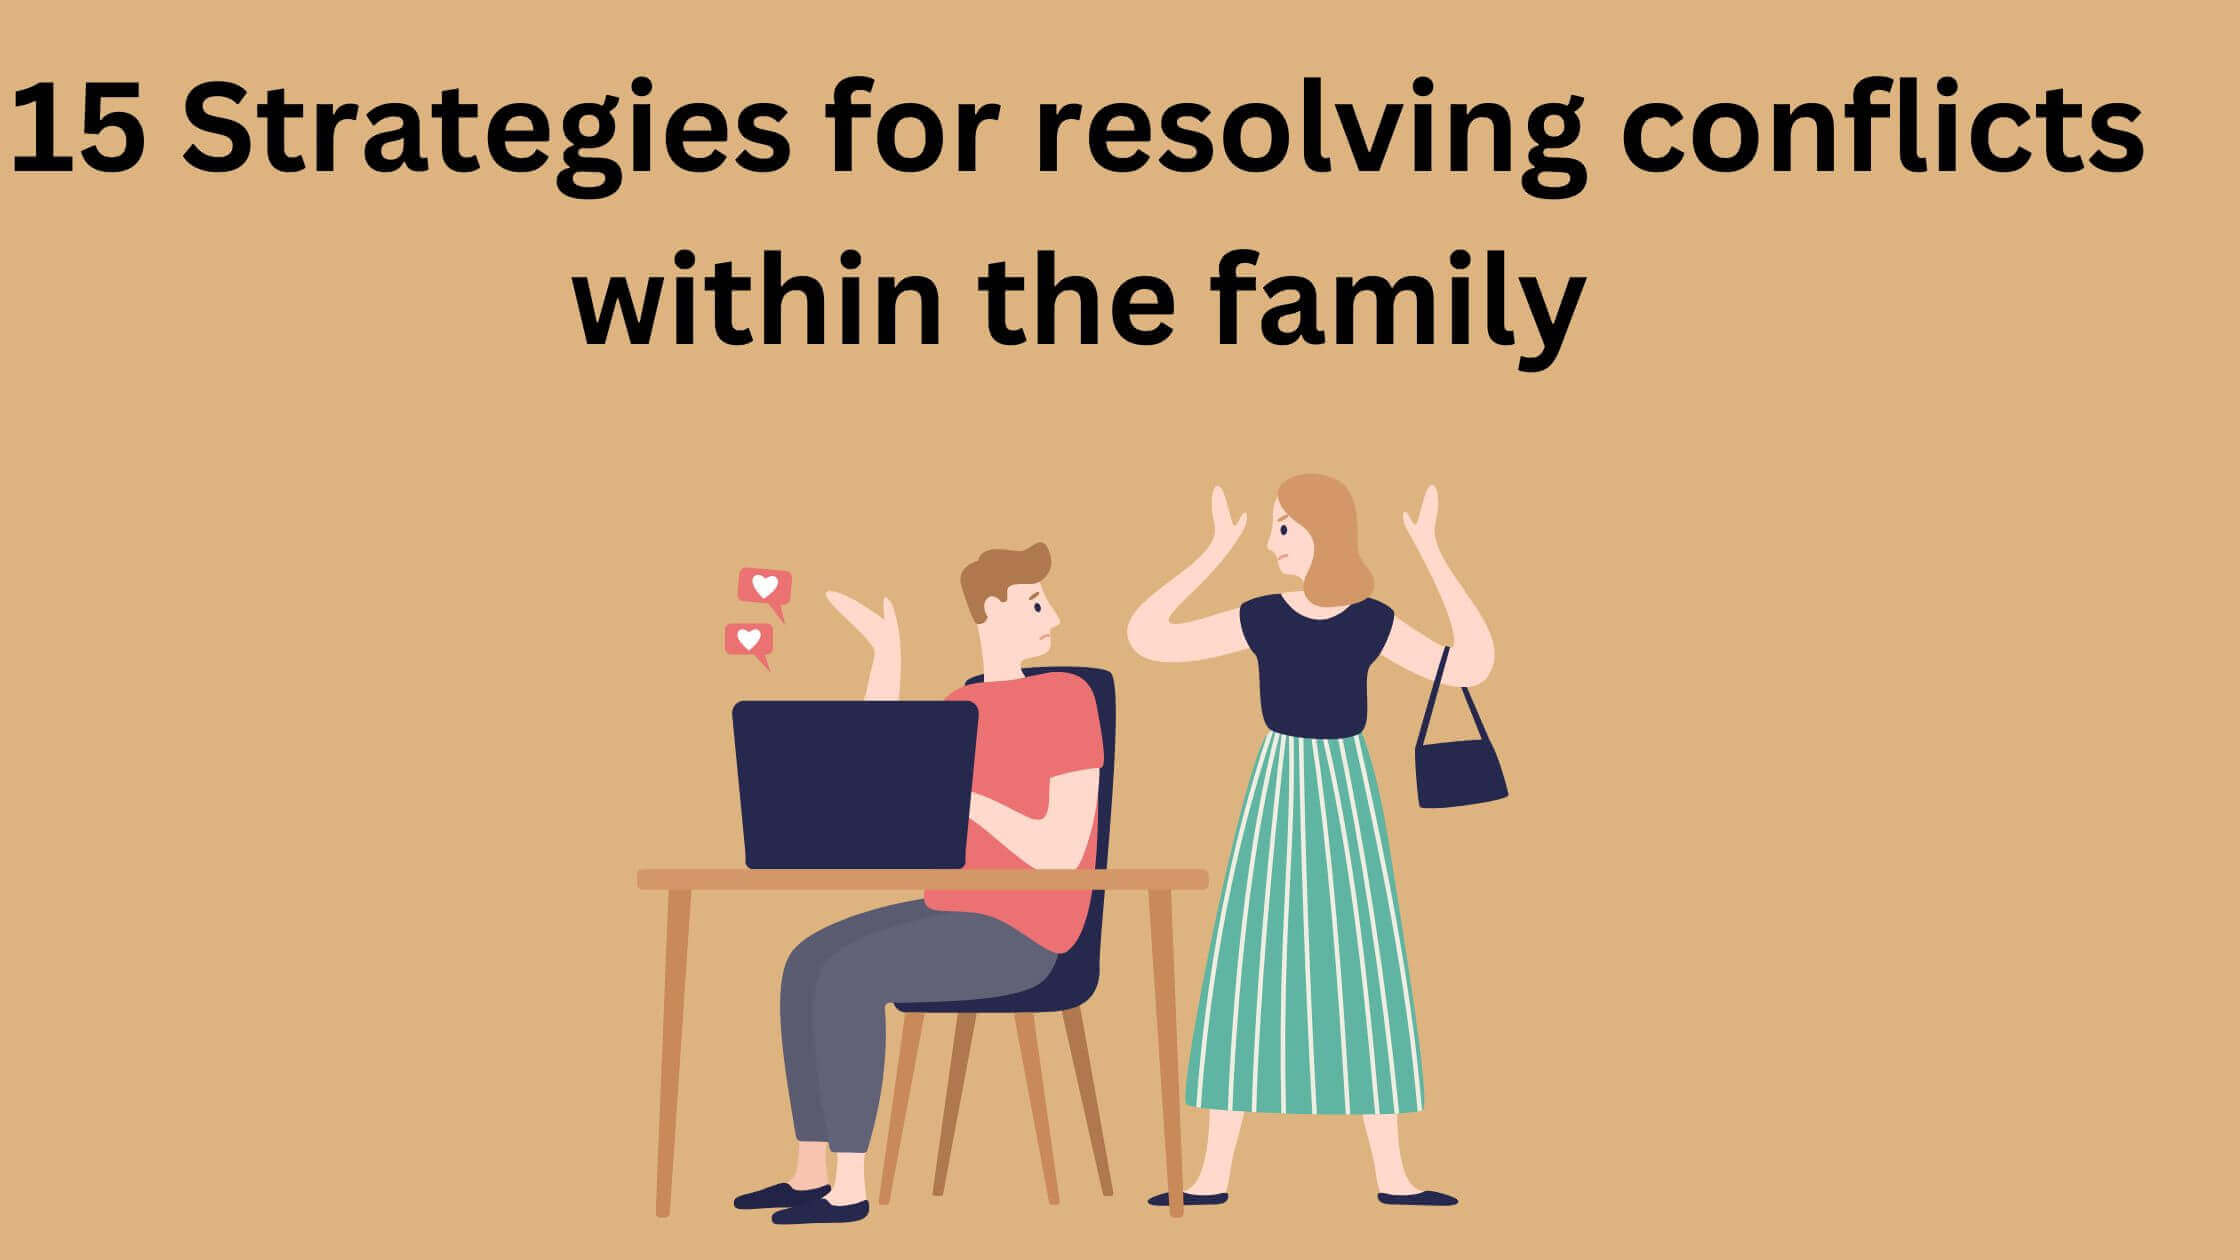 Ways to resolve conflicts within the family